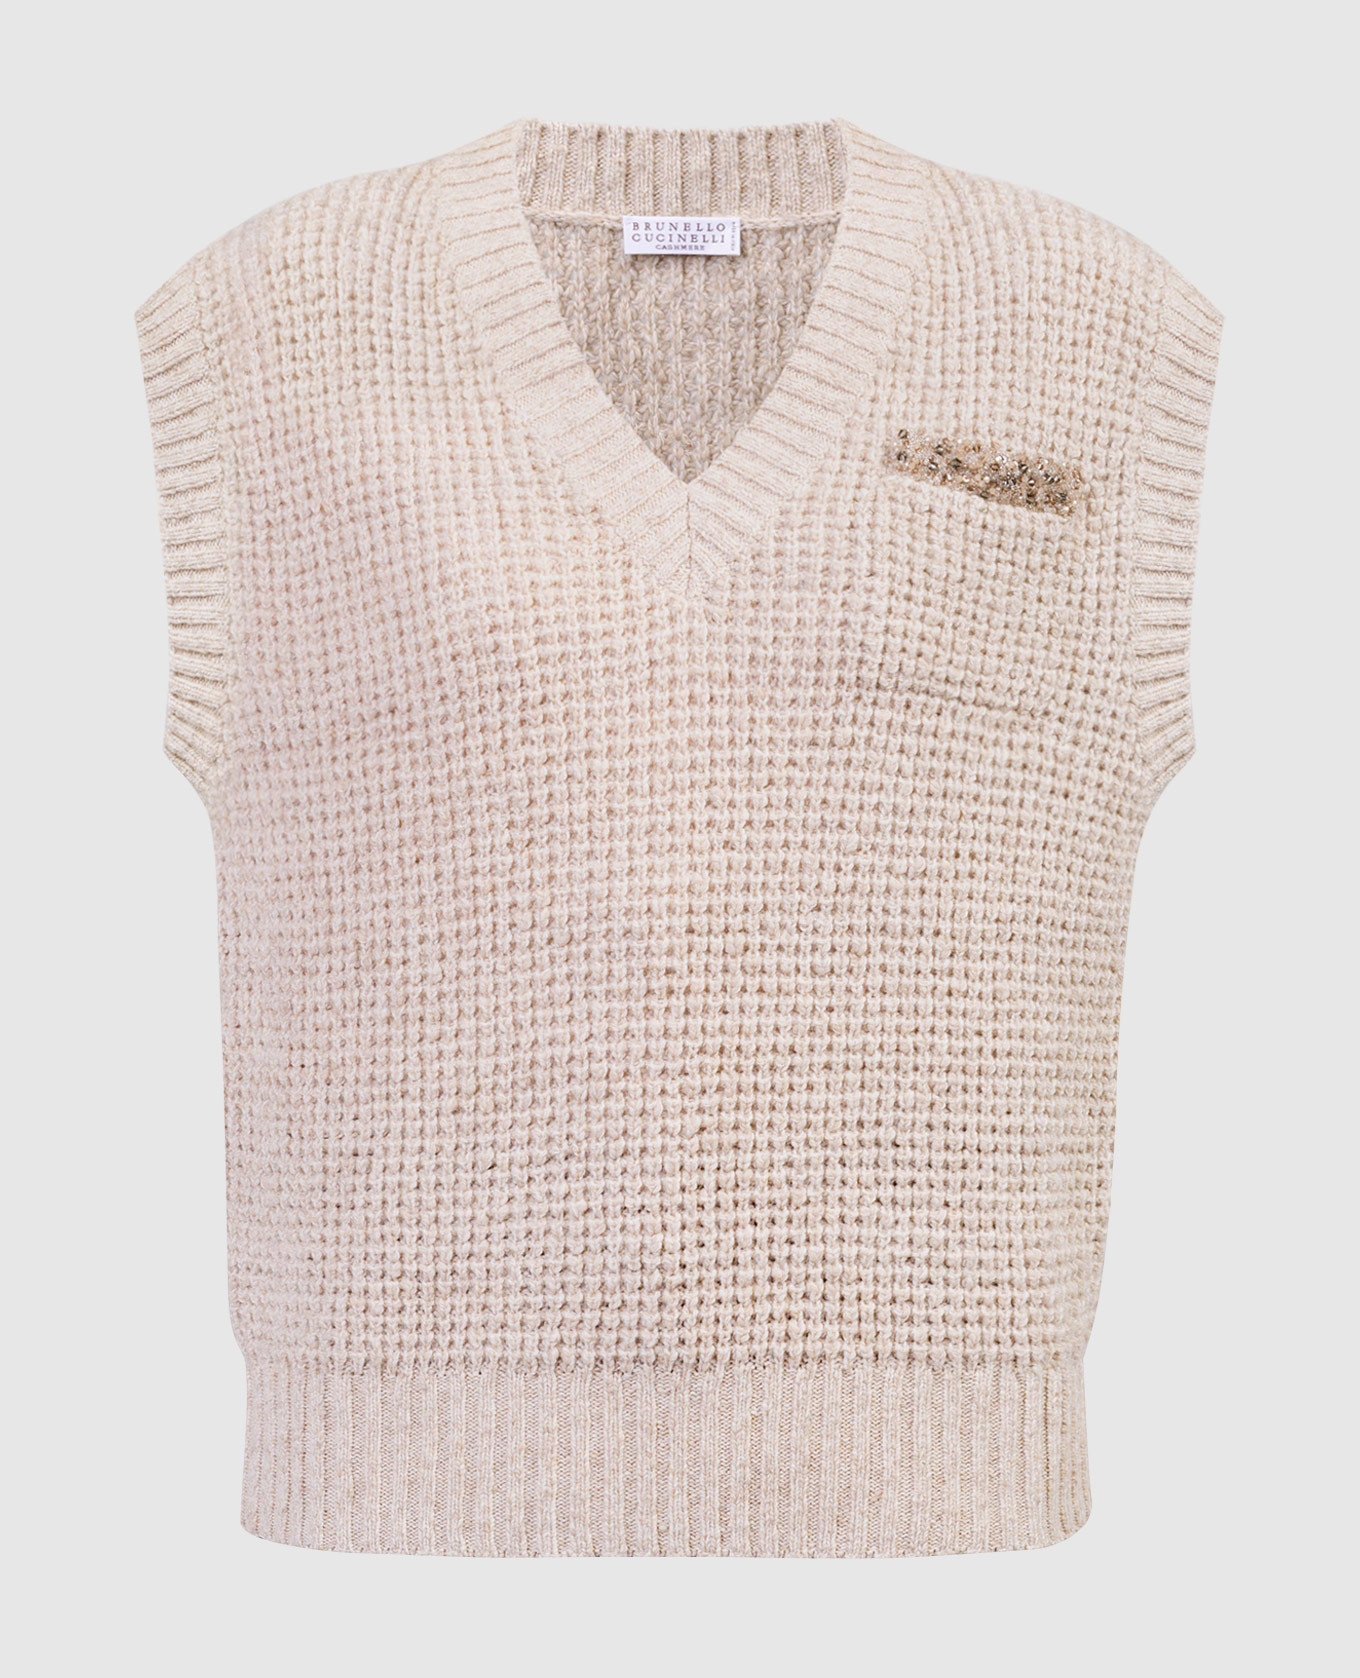 Beige vest made of wool and cashmere with crystals